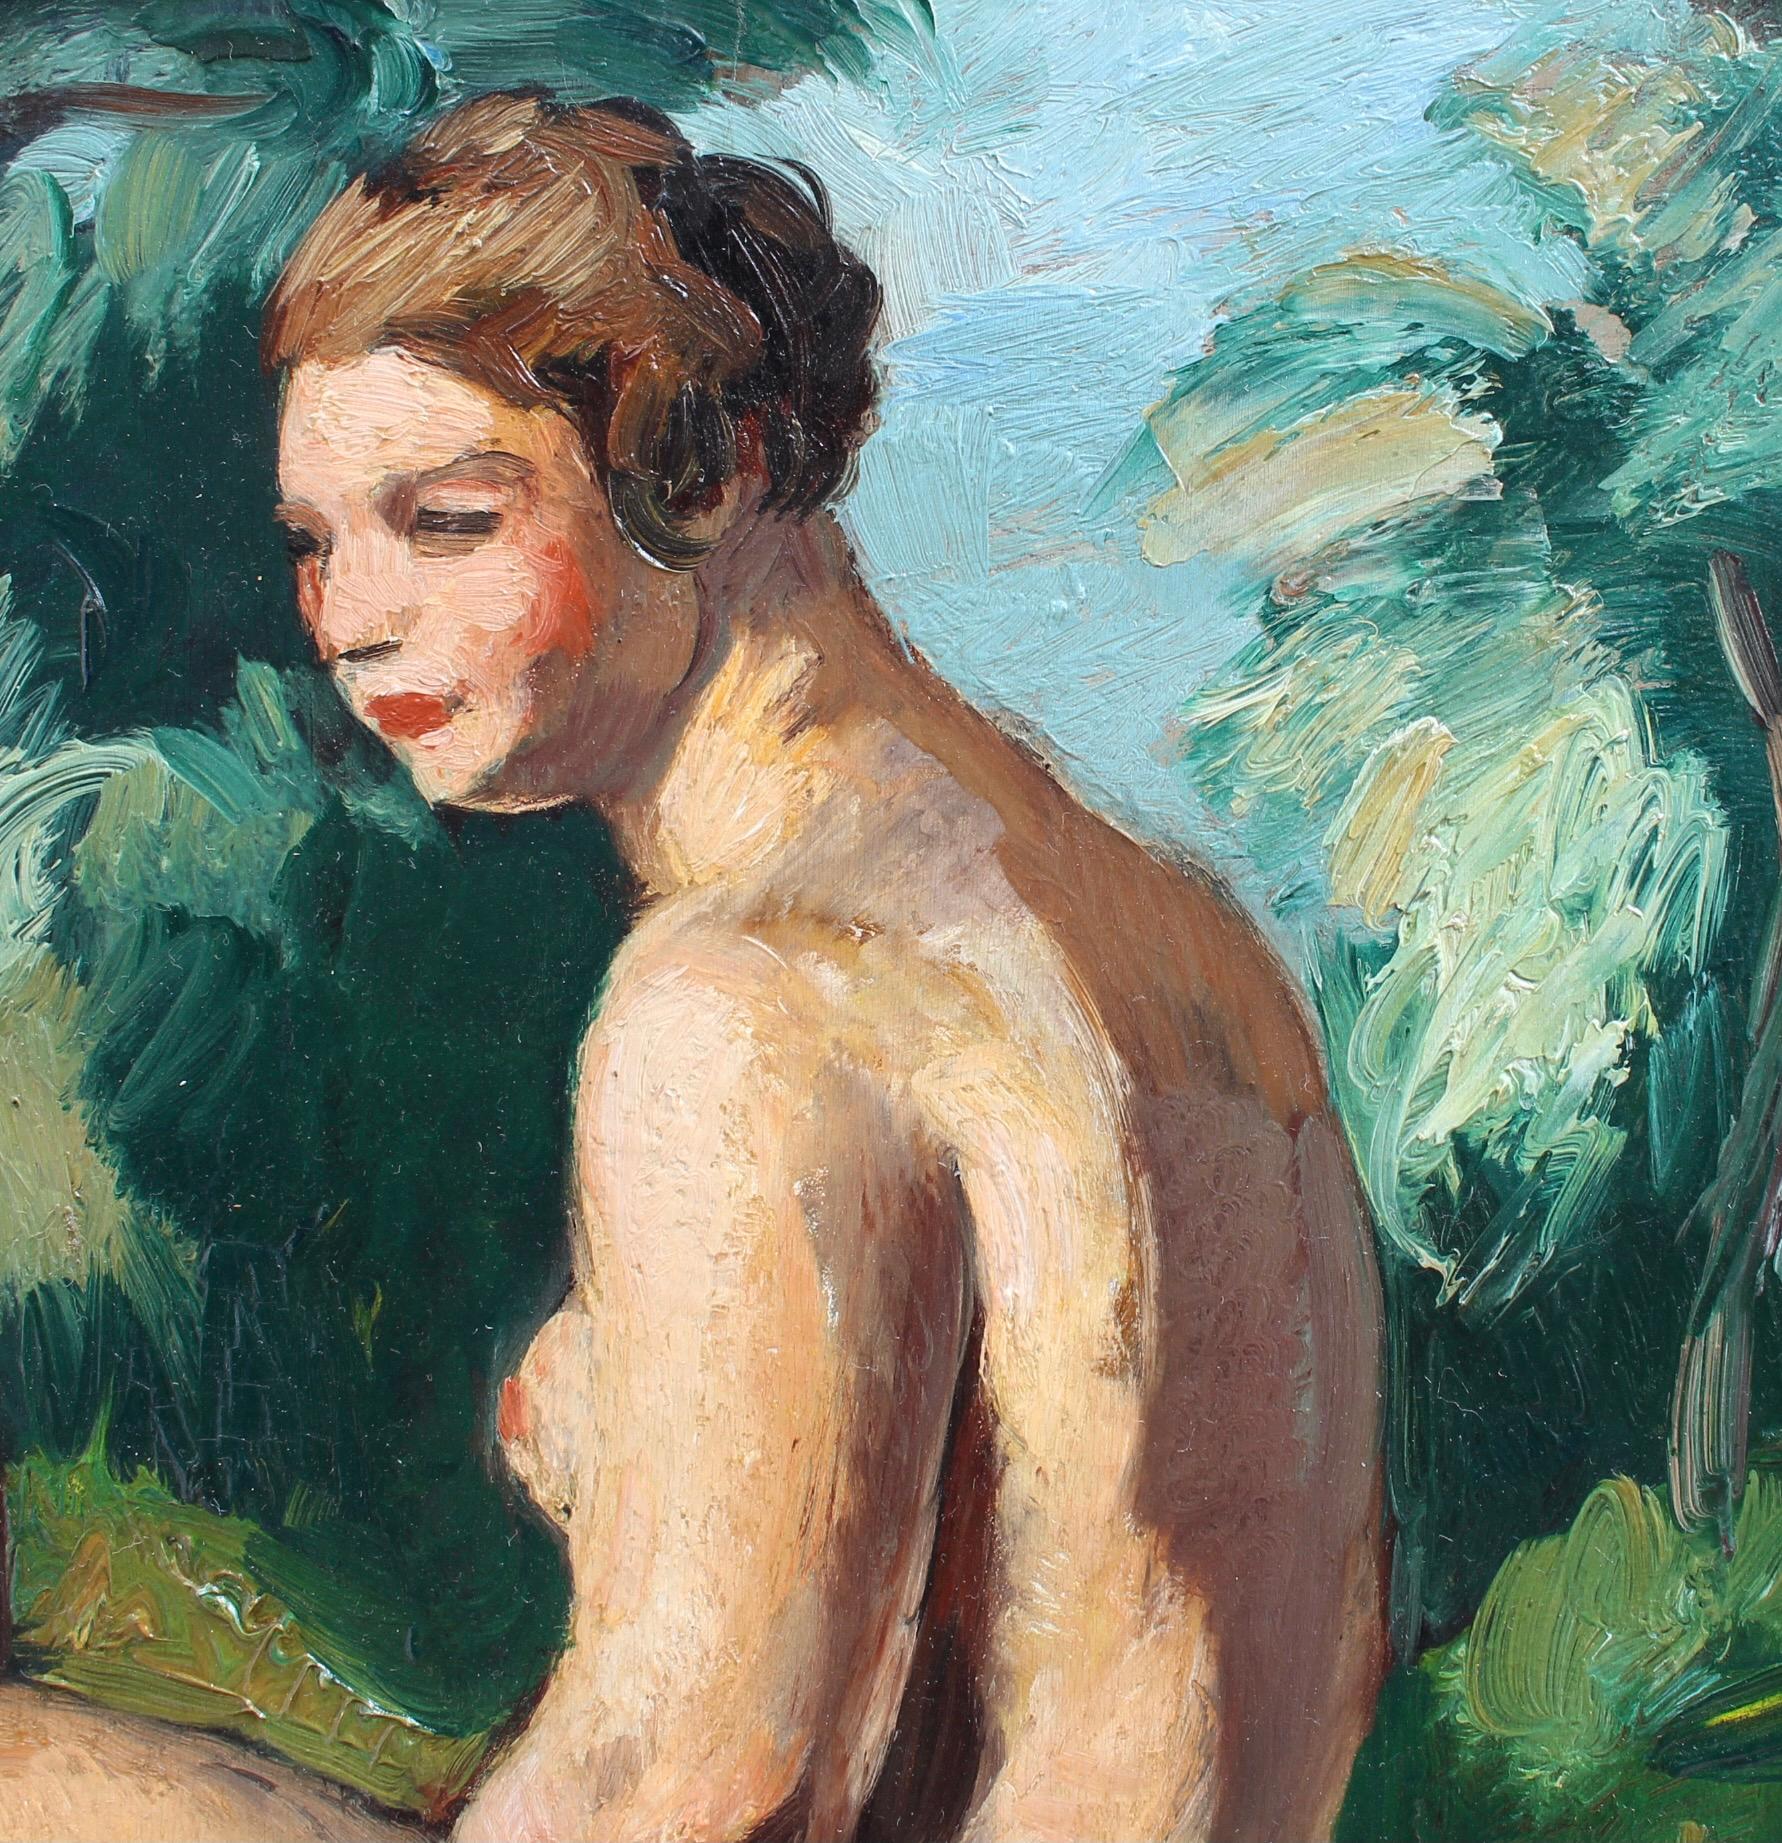 'The Bather', oil on board, by Charles Kvapil (1934). The world of art has for centuries depicted bathers in one form or another. Kvapil's wonderfully alluring versions may likely be inspired by Courbet and Cézanne. The nude appears in a dreamy